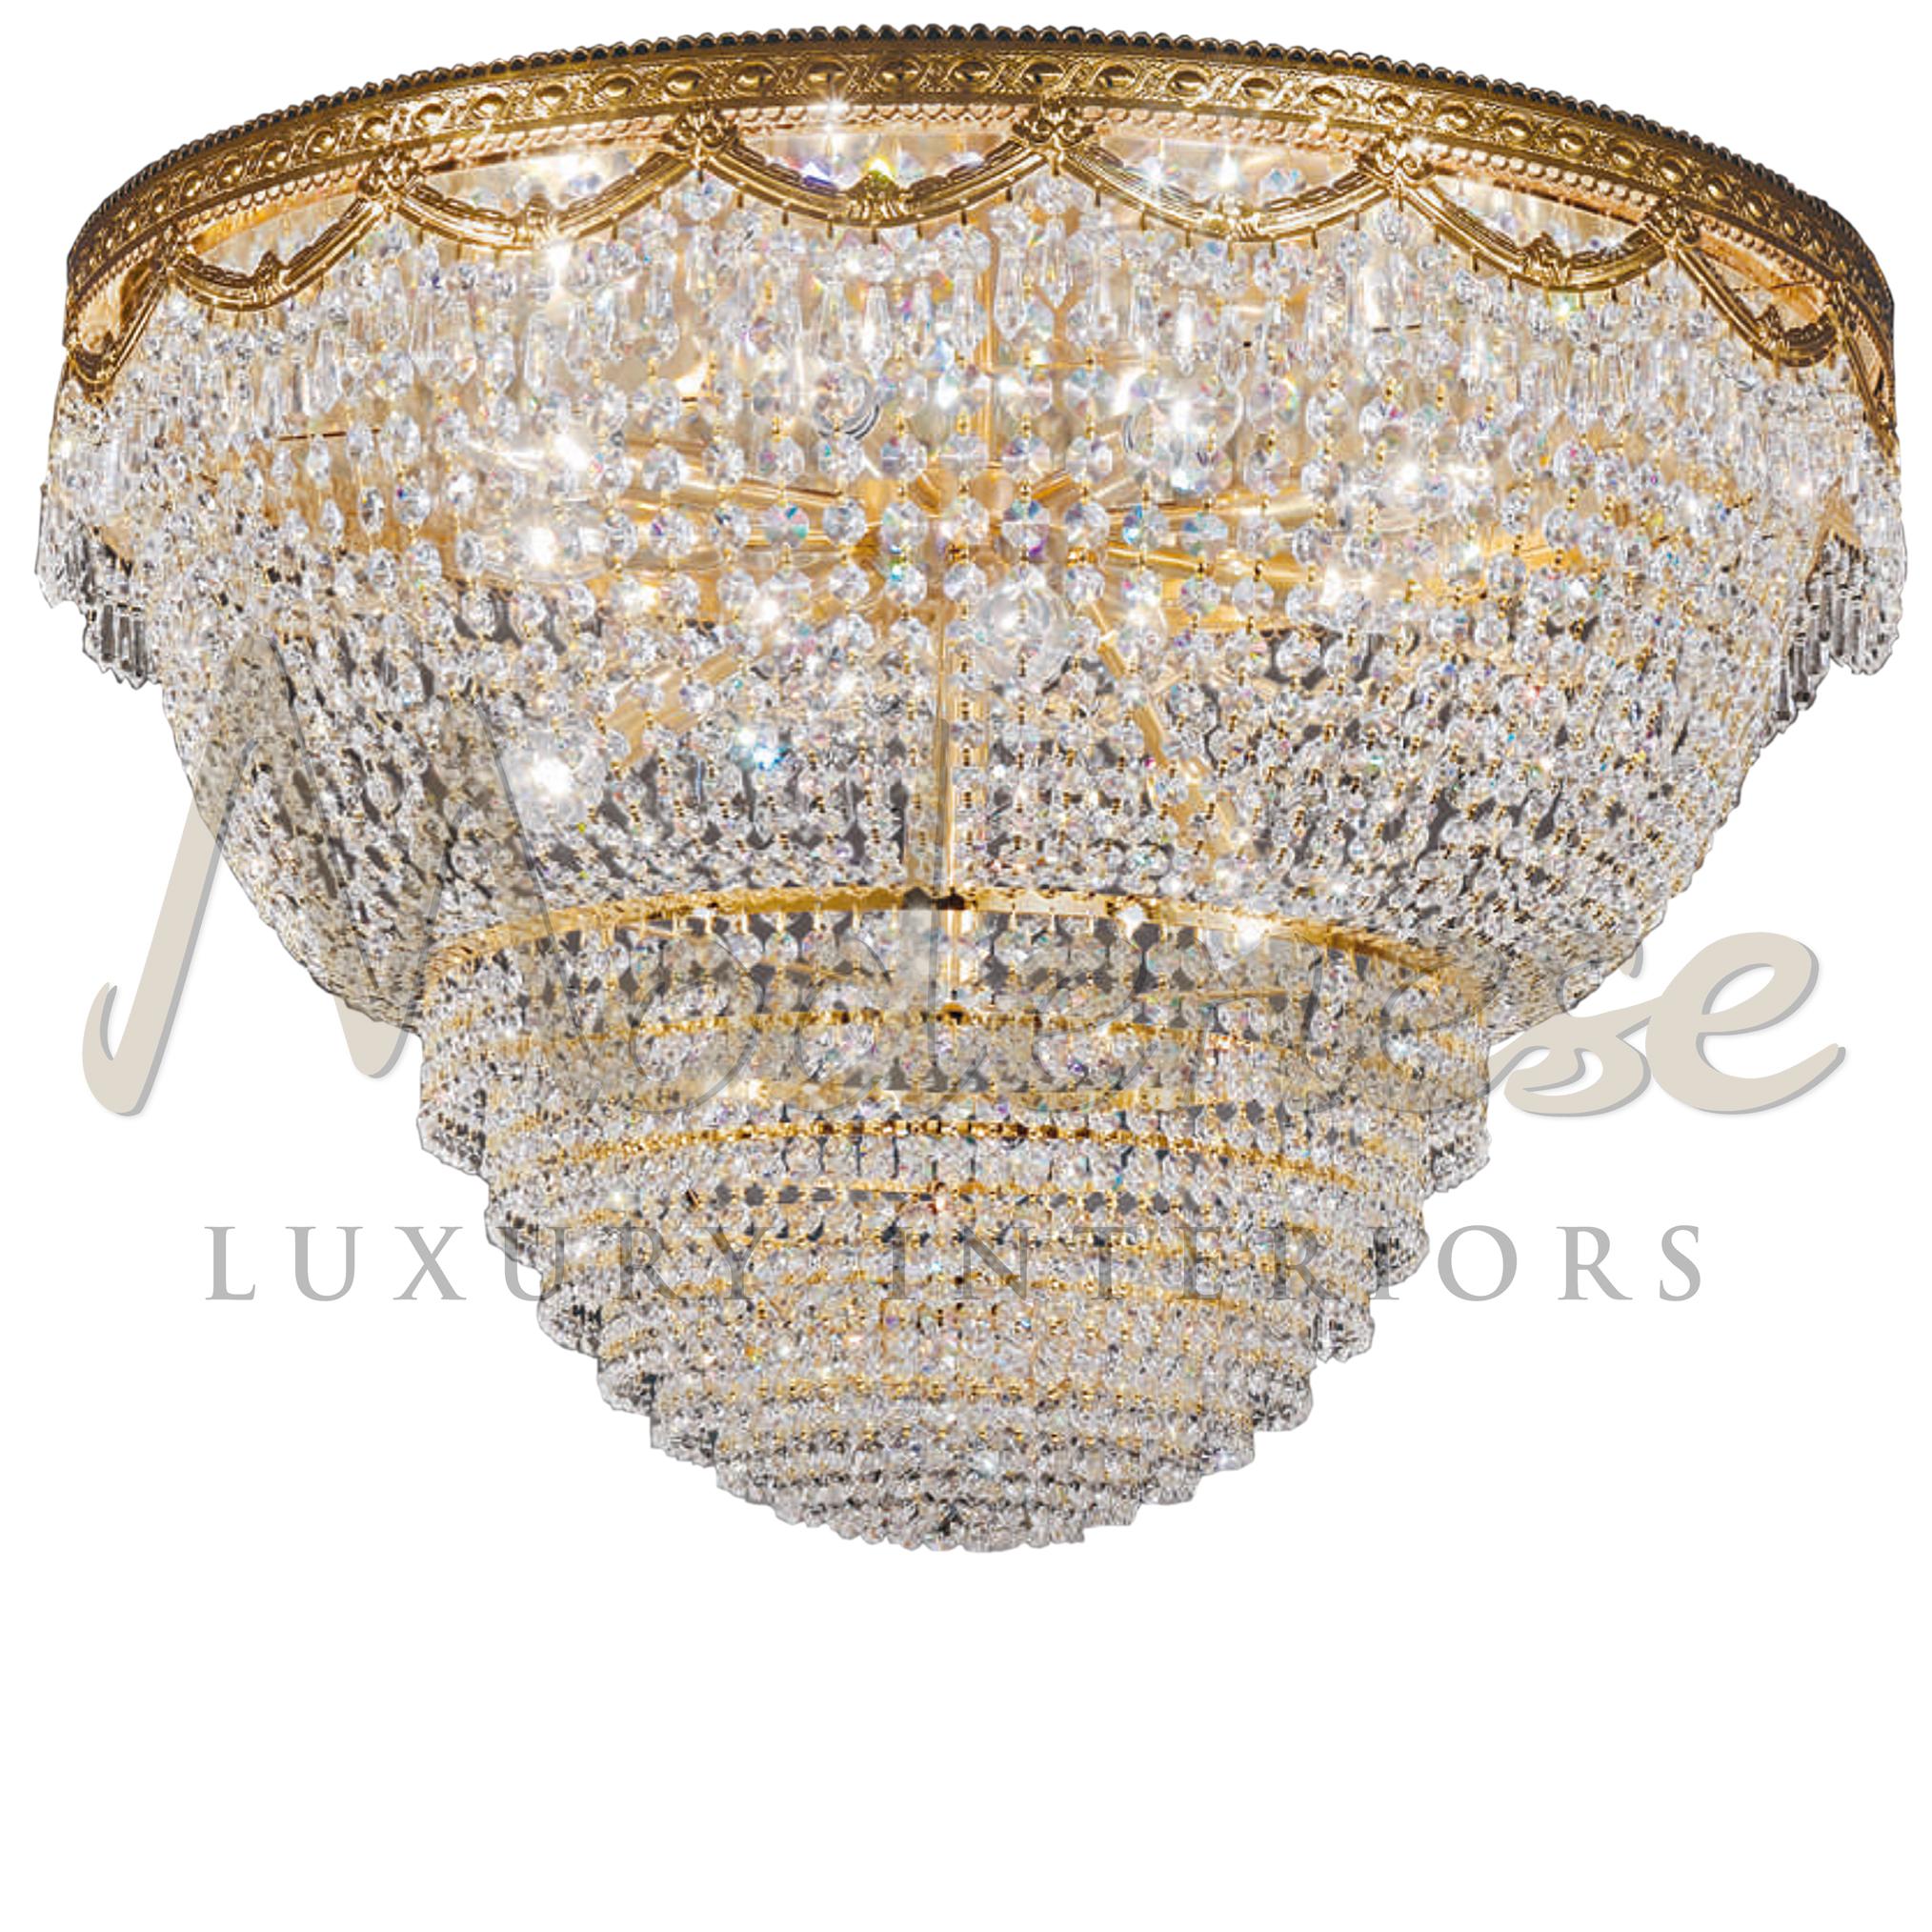 This Modenese Gastone Luxury Interiors ceiling lamp is famously associated with grand rooms, hallways and foyers for its rich 24kt gold plated structure and crystals, but they do in fact lend themselves to rooms of all sizes and uses. This model